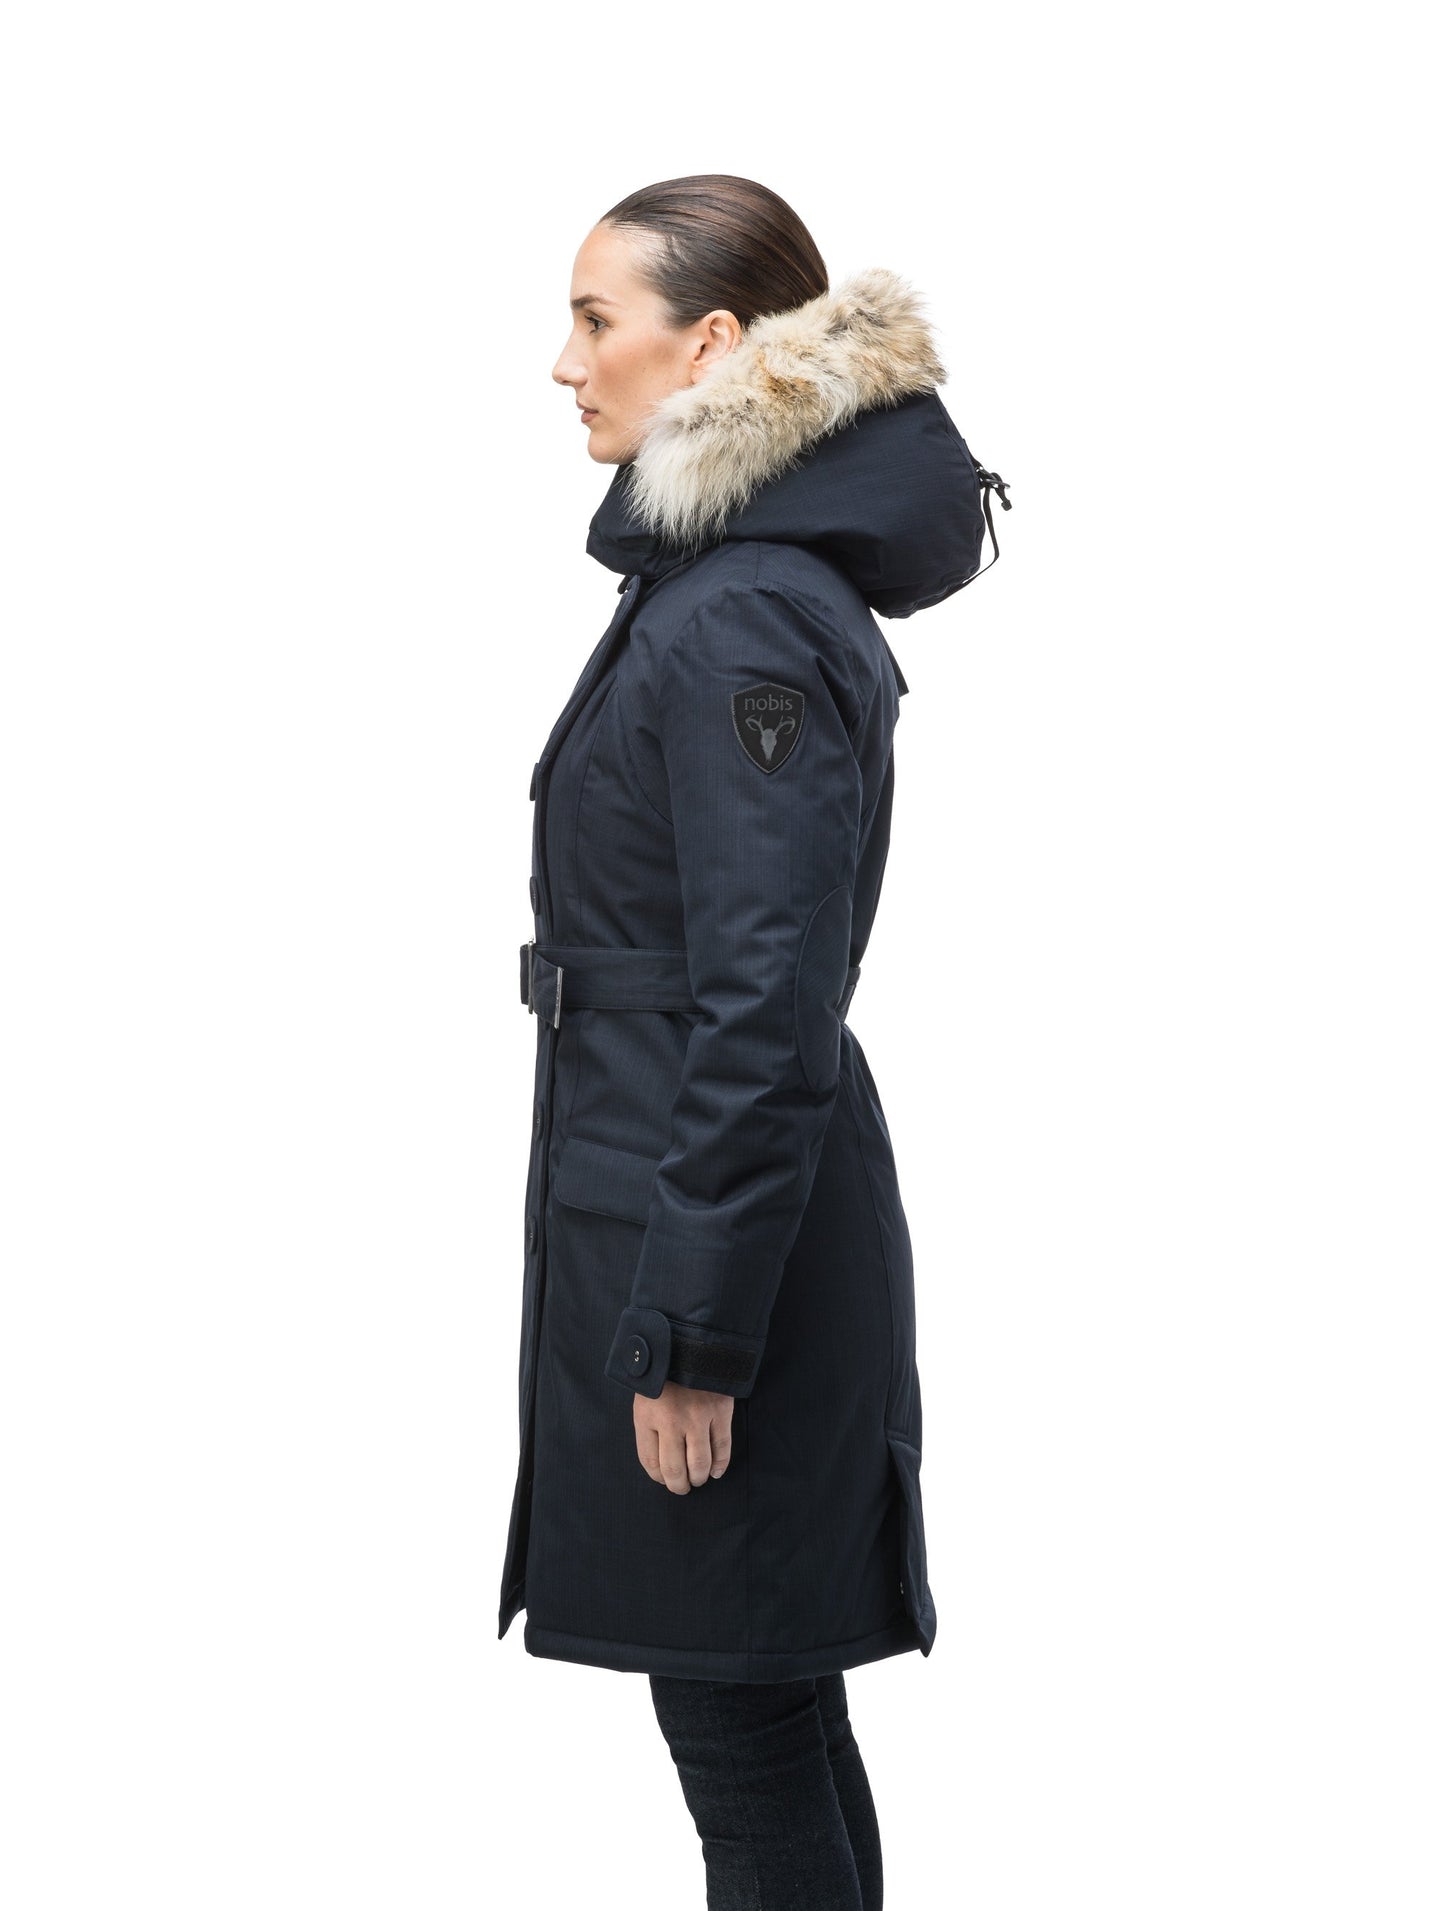 Women's down filled double breasted peacoat with a belted waist in CH Navy